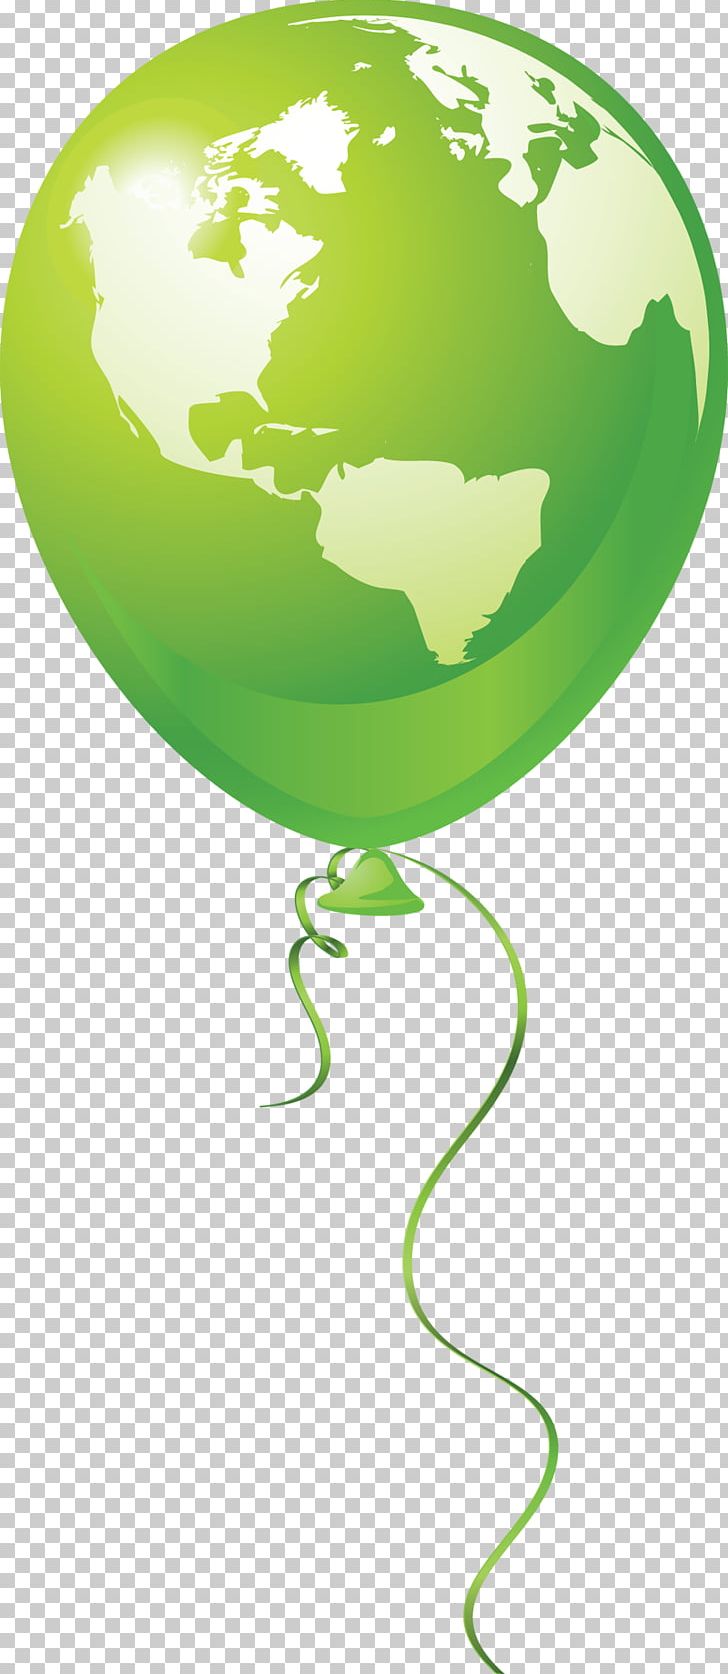 Green Business Environment Indigo PNG, Clipart, Balloon, Business, Color, Company, Description Free PNG Download